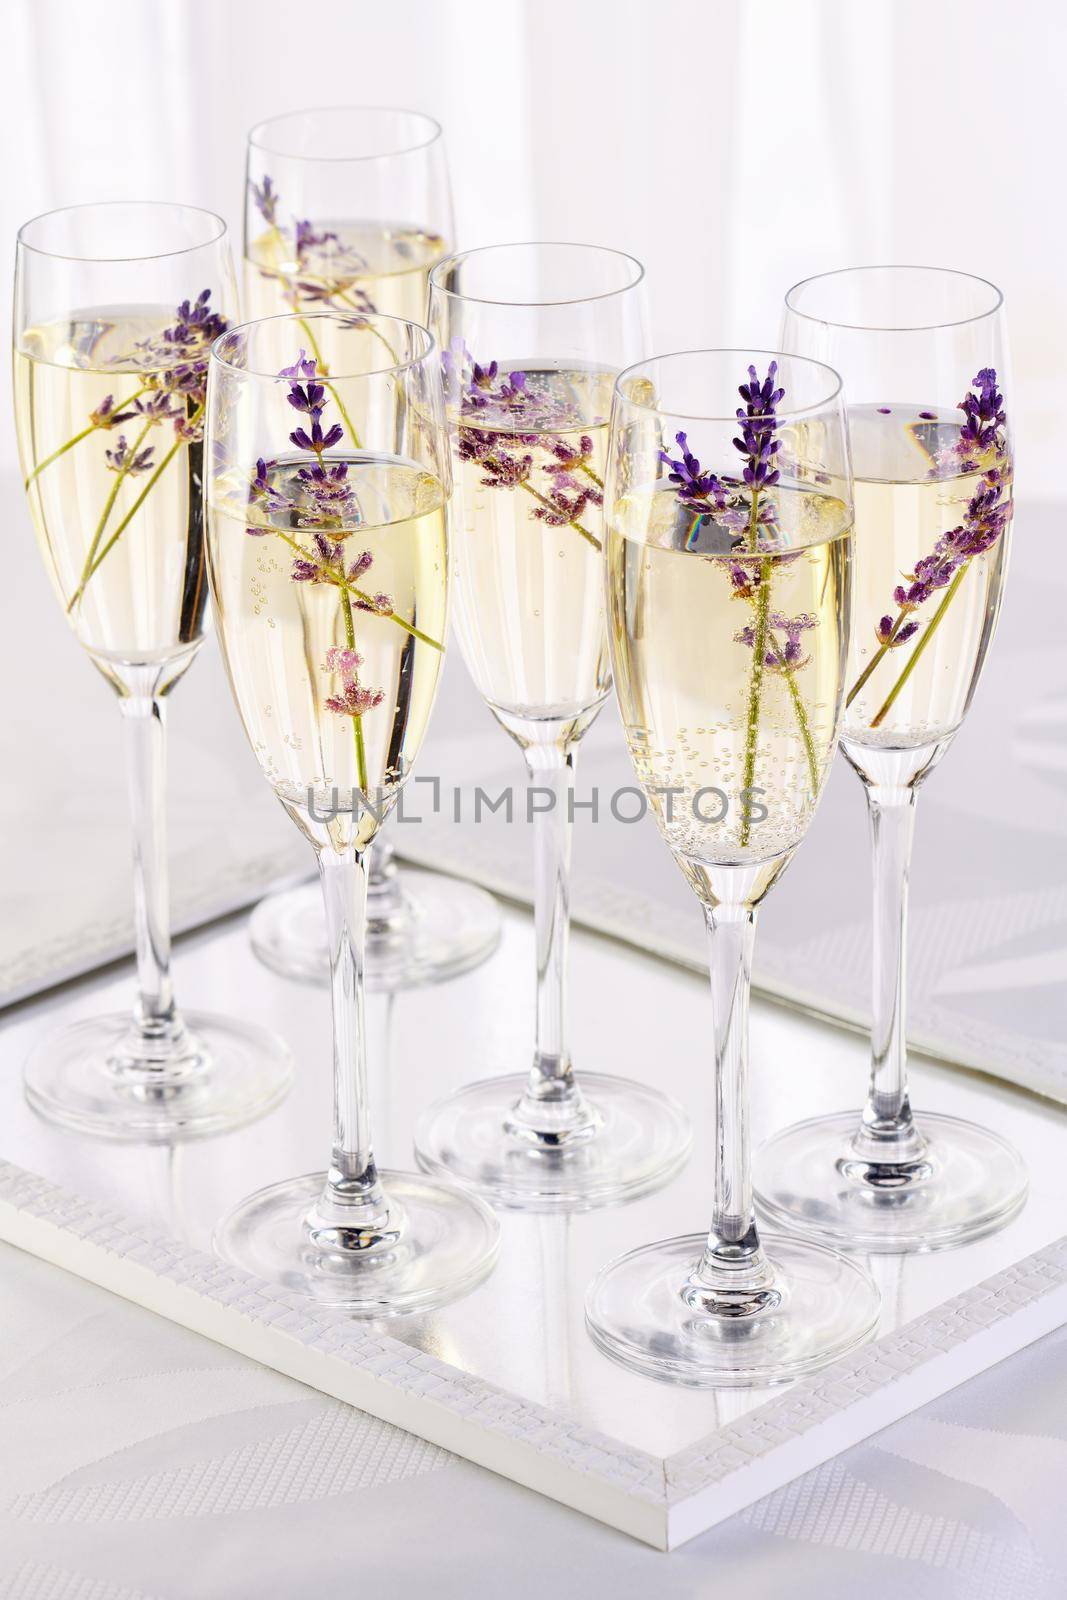 Lavender mood. Champagne with soft gentle notes of lavender. Drink for a wedding dinner. Wedding theme ideas.